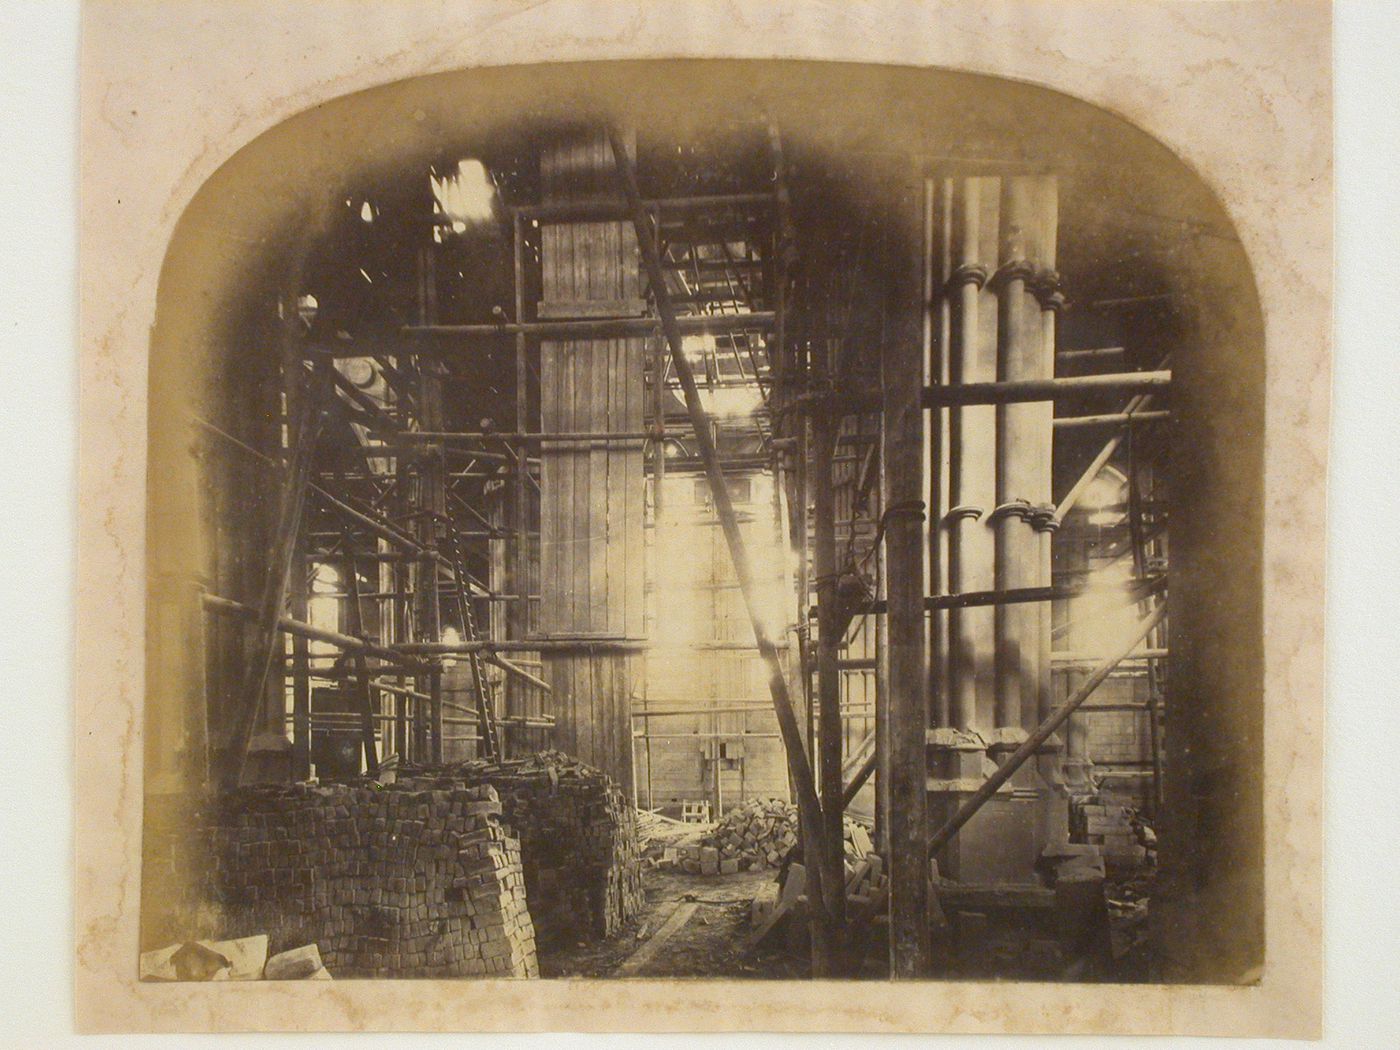 Interior view of the Church of St. Philip Neri (now the Cathedral of Our Lady and St. Philip Howard) under construction, prior to the construction of the floor and showing scaffolds and construction materials, Arundel, West Sussex, England